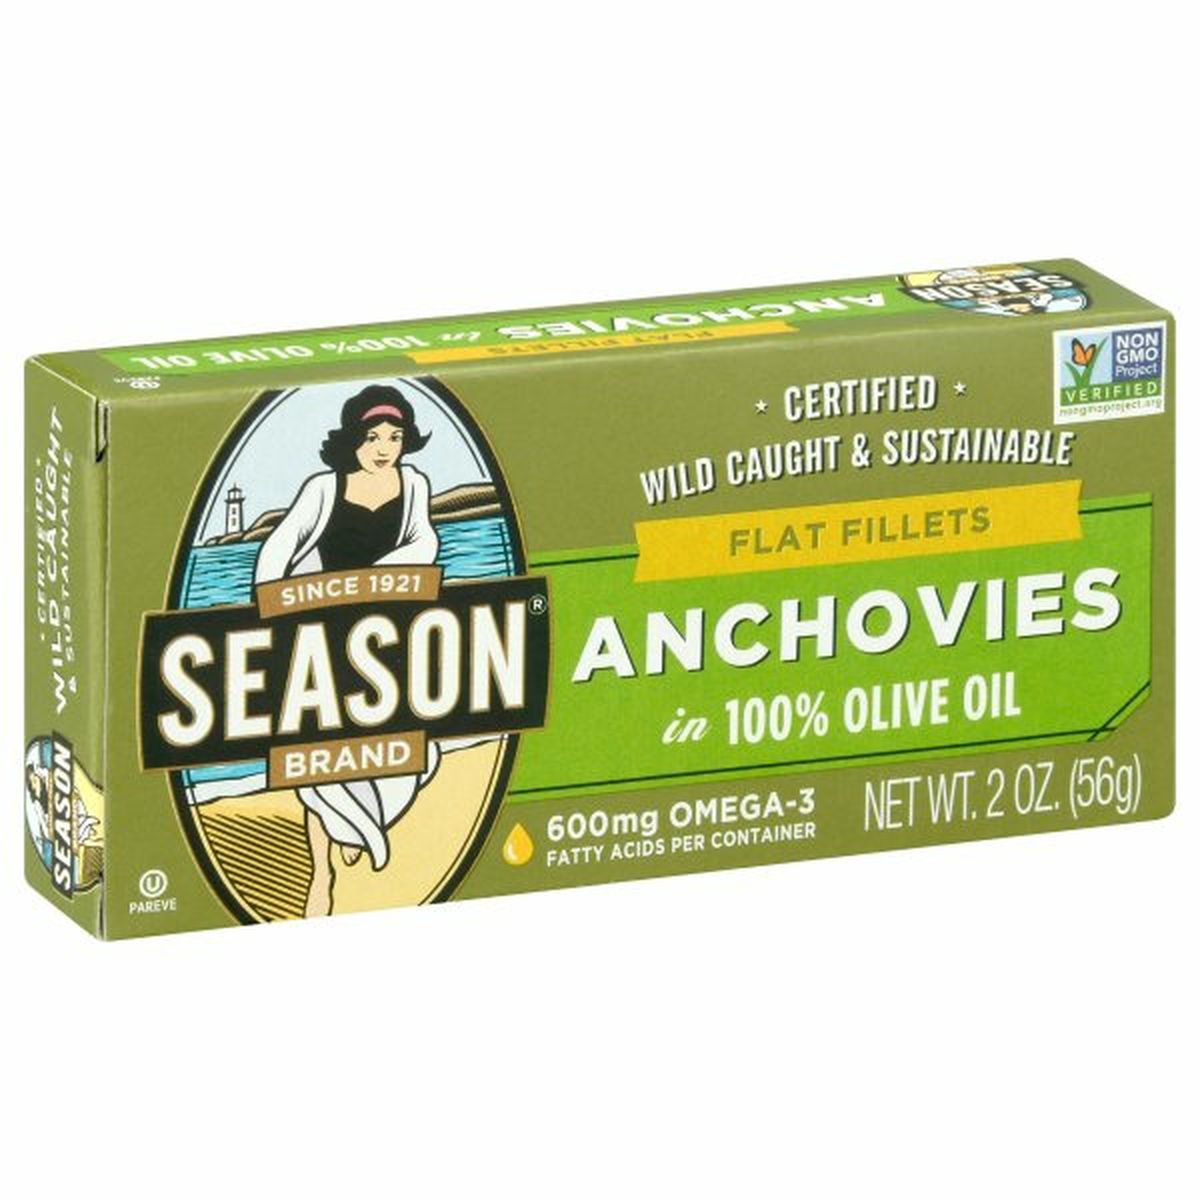 Calories in Season Brand Anchovies in 100% Olive Oil